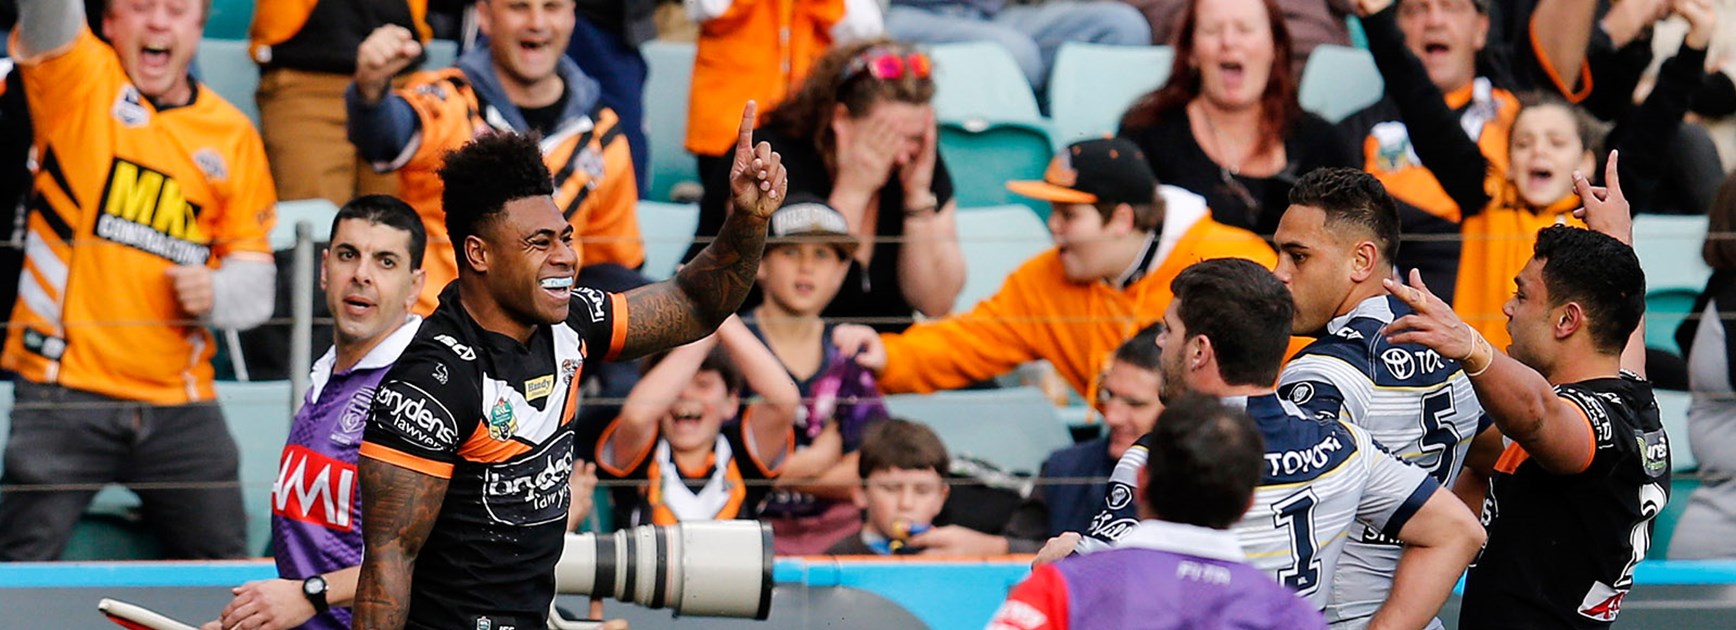 The Wests Tigers celebrate another try against the Cowboys at Leichhardt Oval.